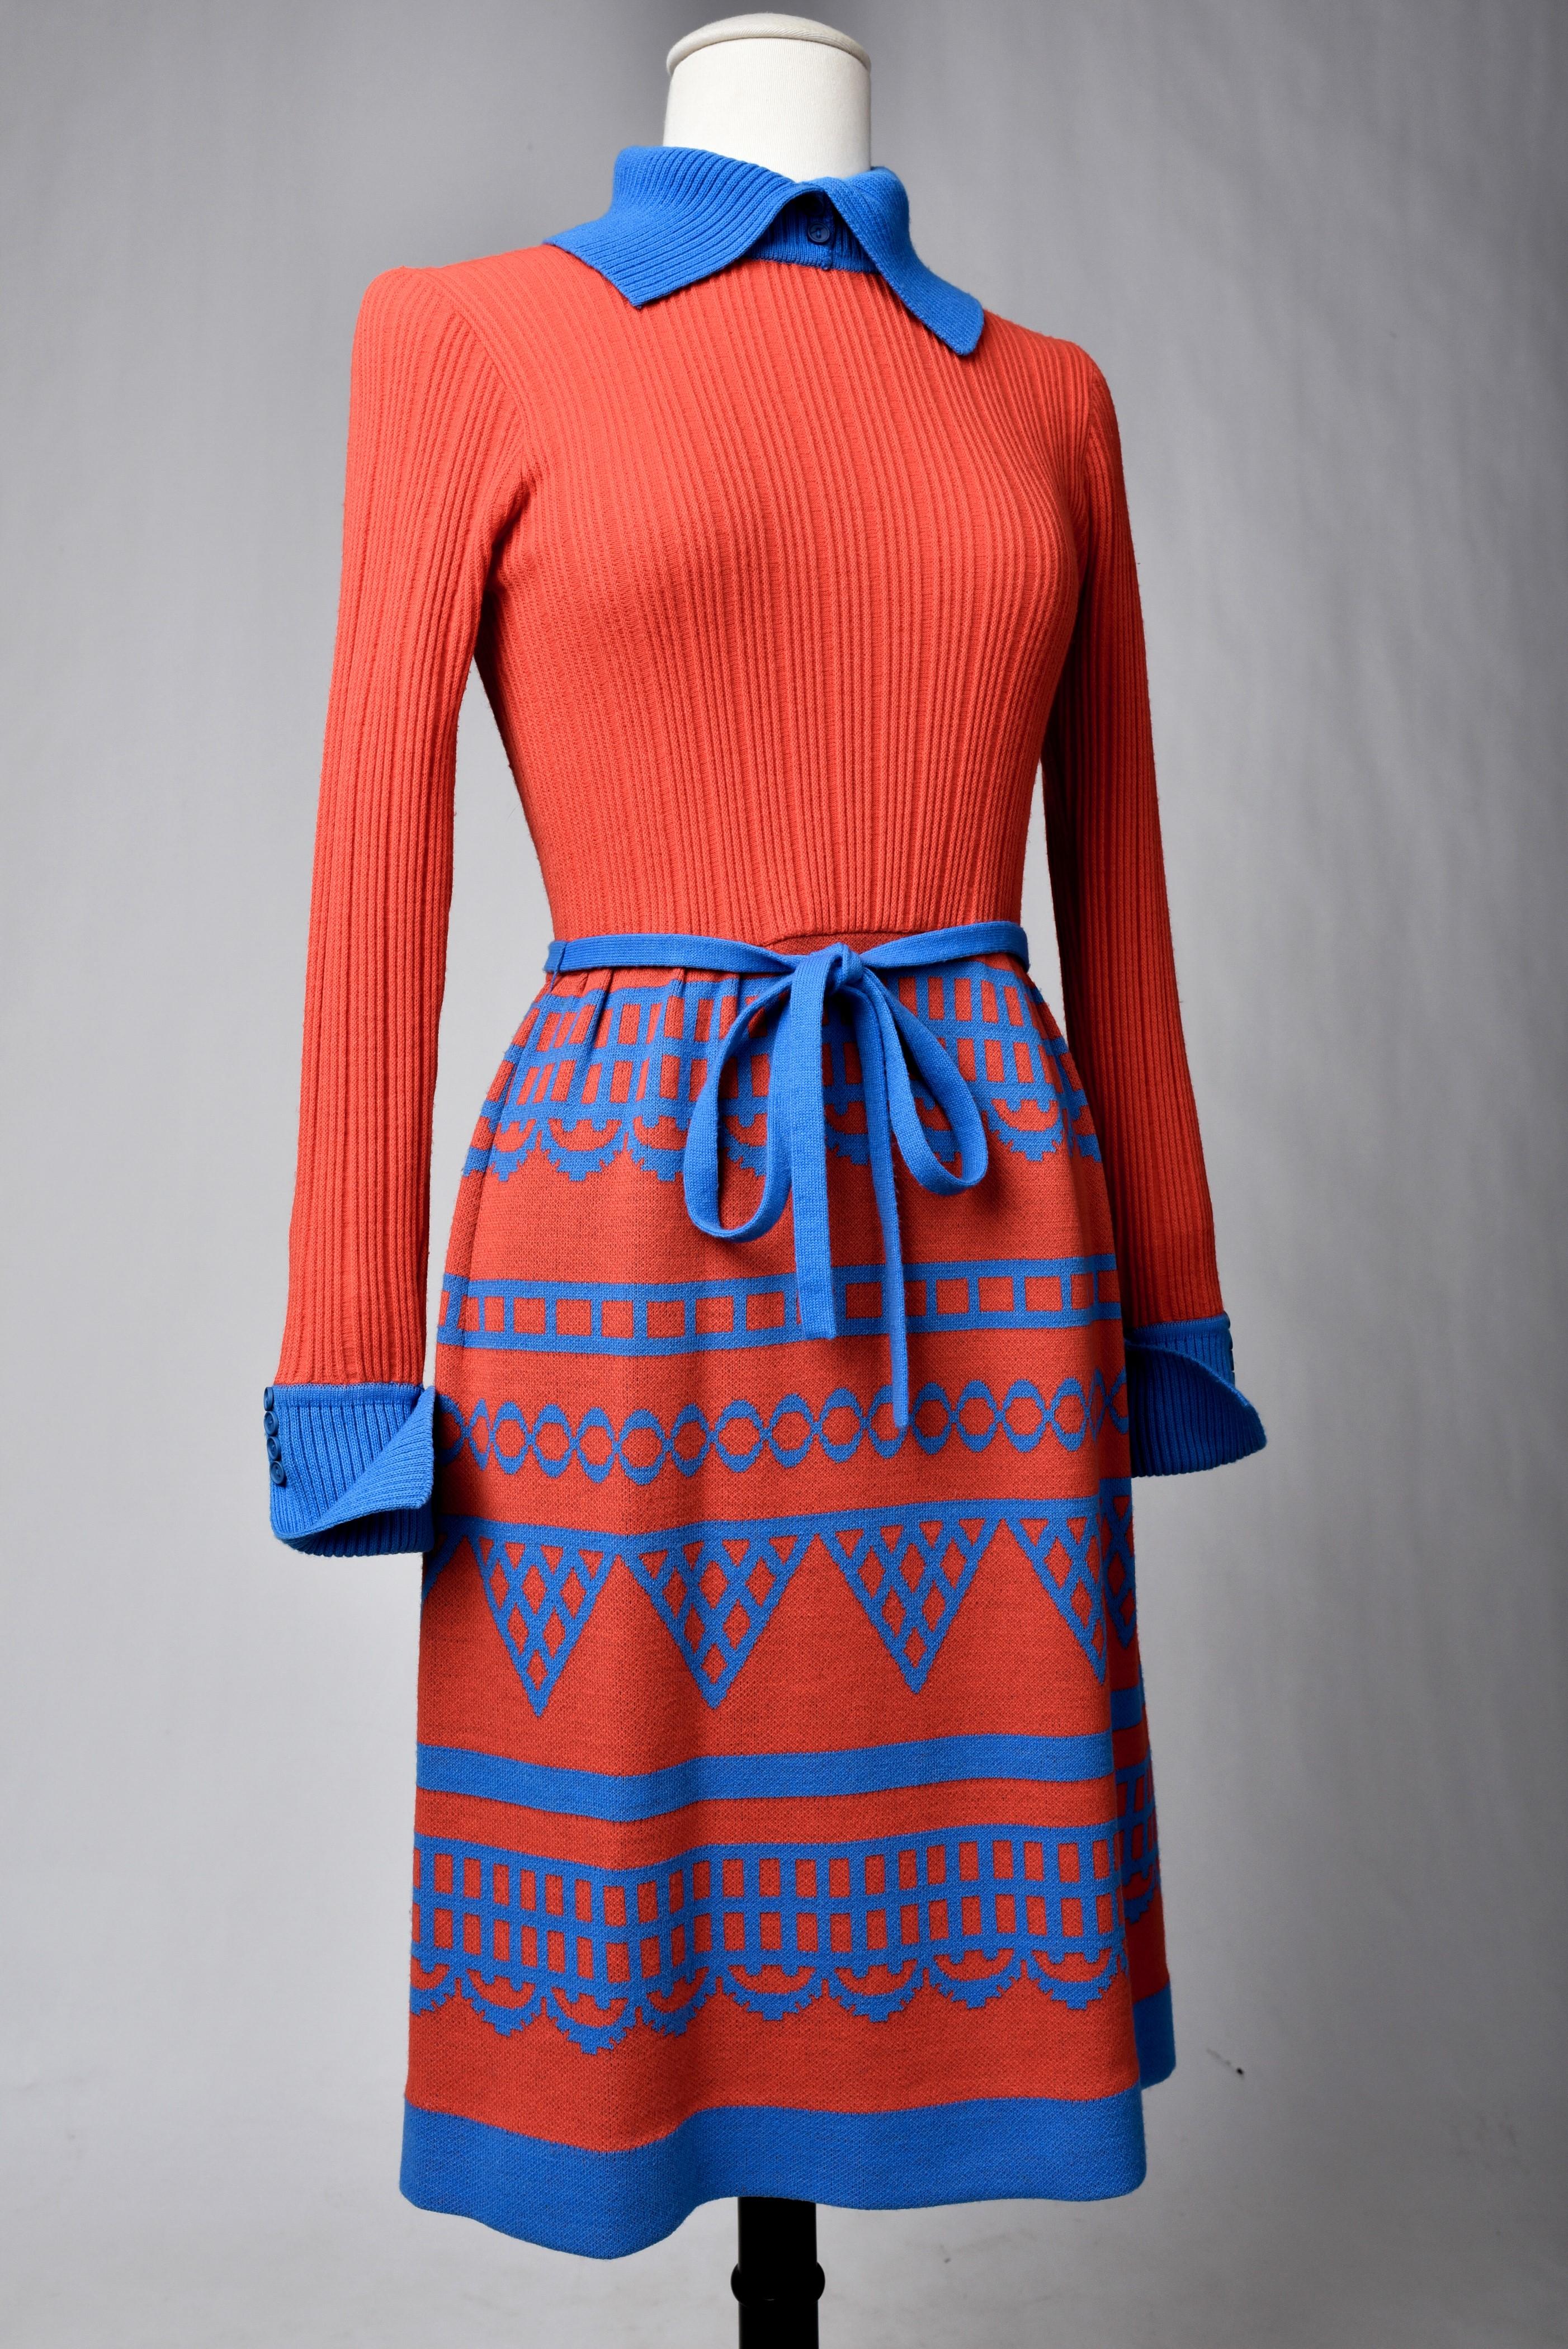 Circa 1975 - 1980
France - England

Scarlet red and blue wool knit day dress signed Miss Féraud by Rembrandt, British branch of the famous French House.  Straight day dress, long sleeves and turtleneck with buttoned flap cuffs. Zip closure in the